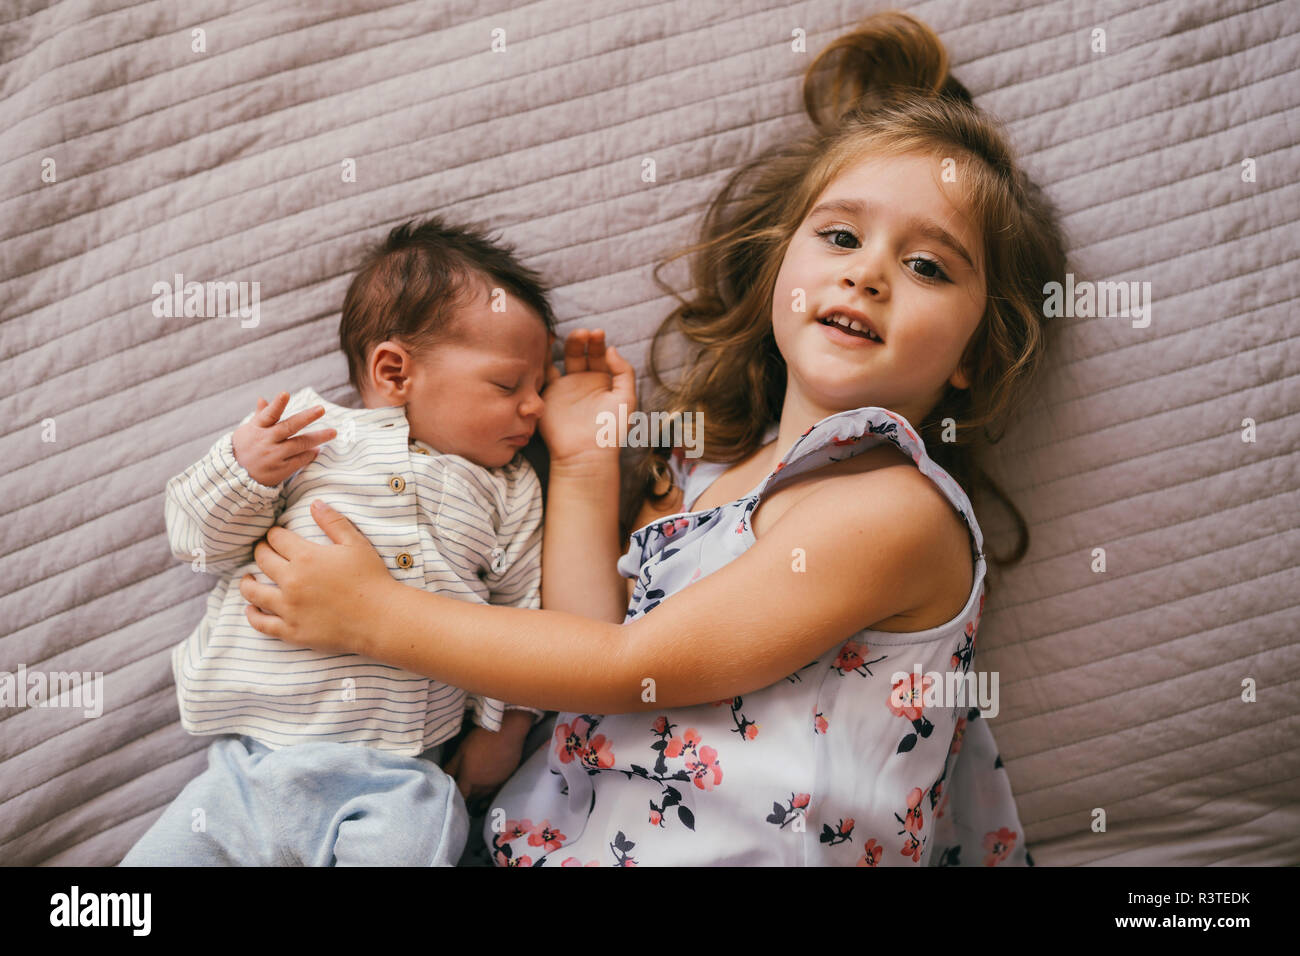 Smiling girl lying on blanket cuddling with her baby brother Stock Photo